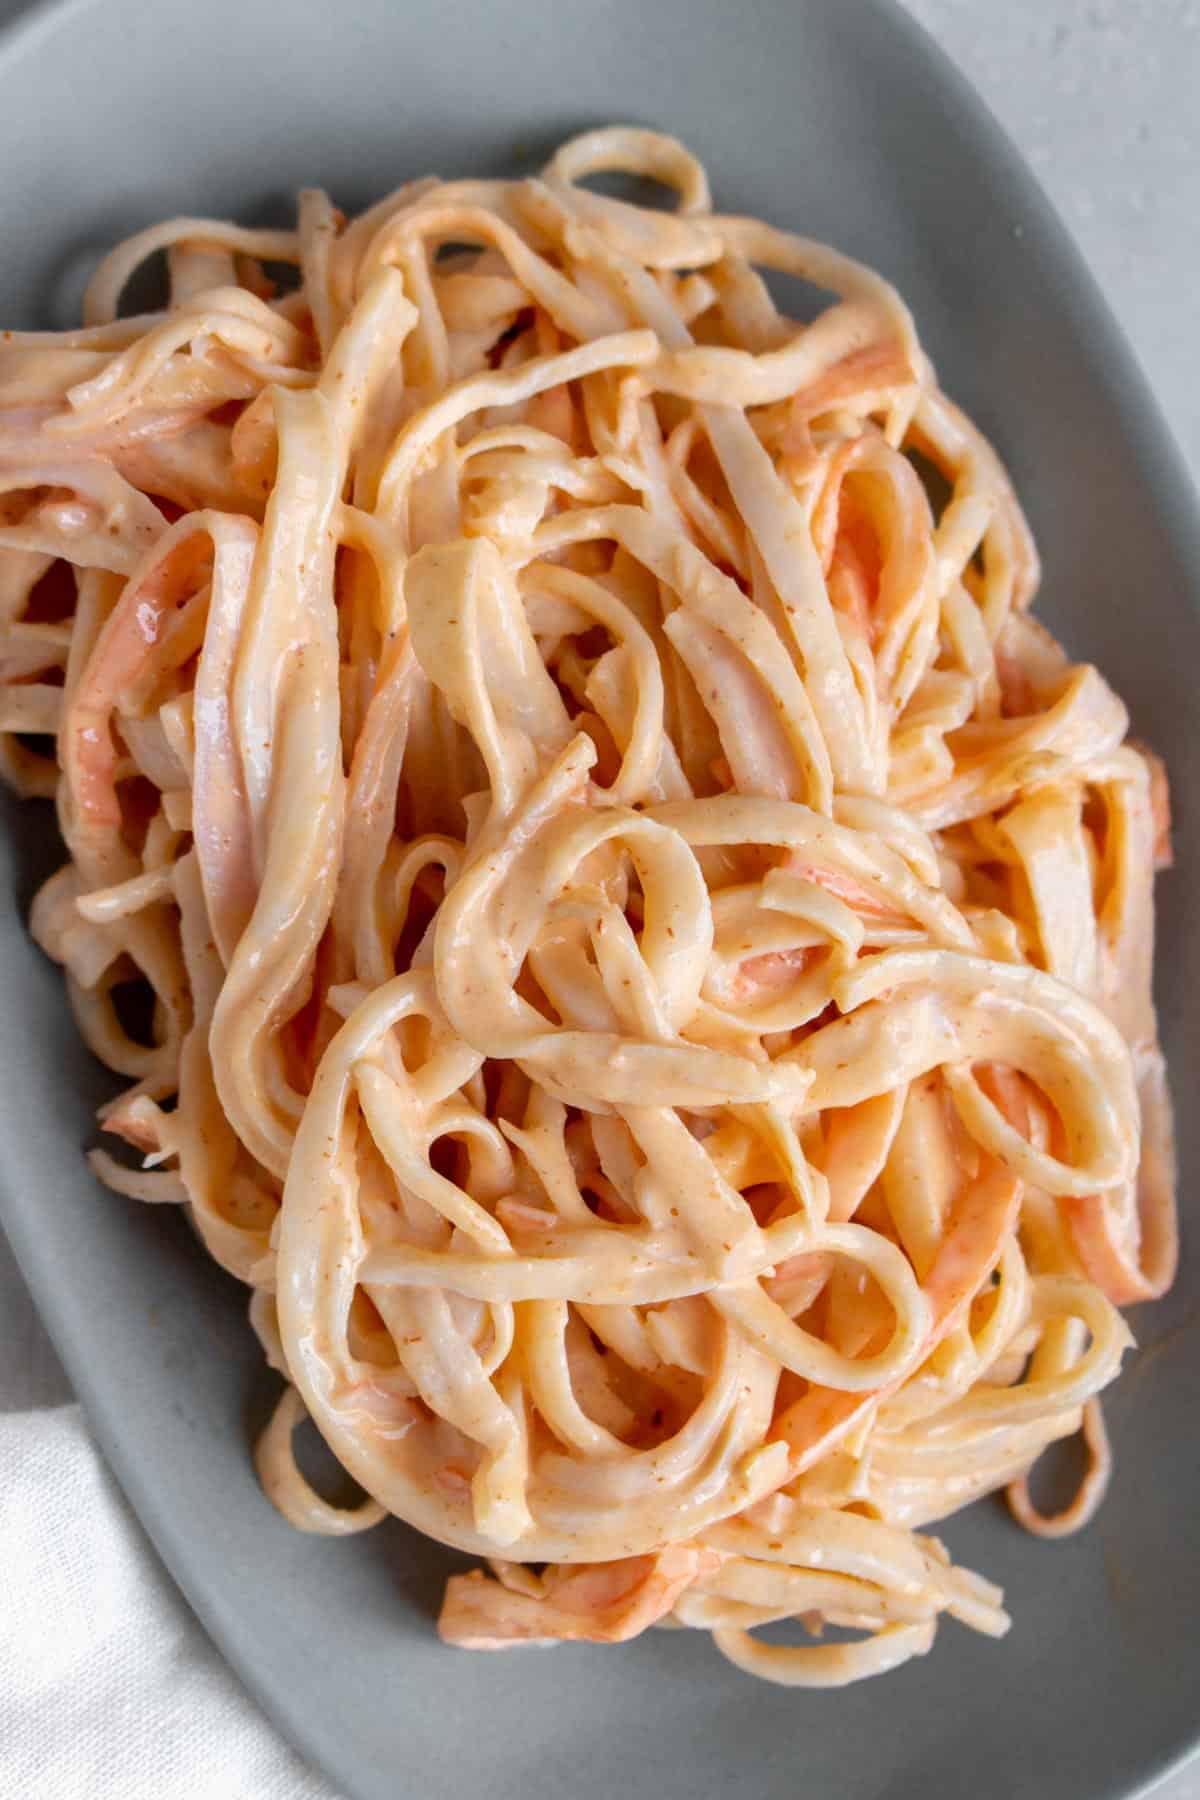 A plate of pasta with imitation crab sauce.